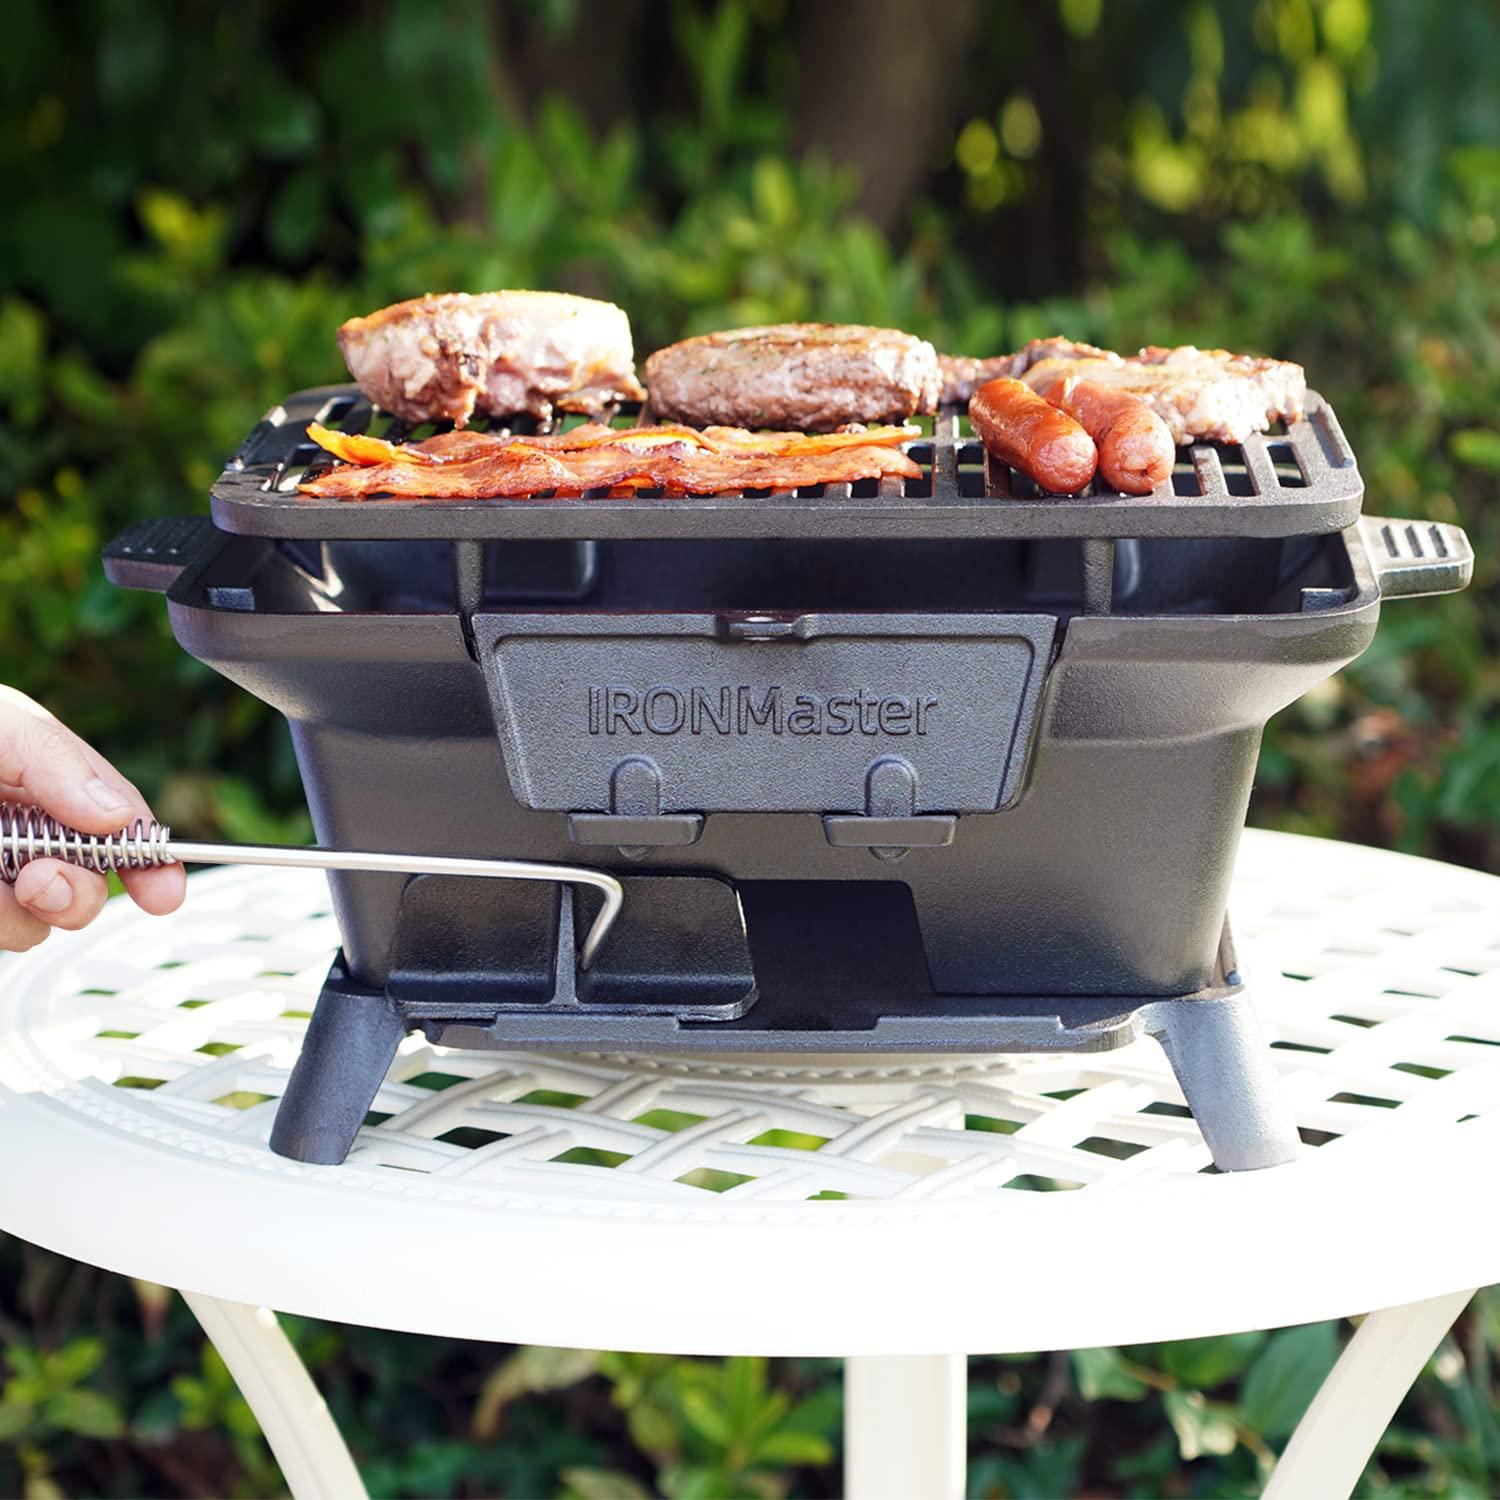 IronMaster Hibachi Grill Outdoor, Small Portable Charcoal Grill, 100% Pre-Seasoned Cast Iron, Japanese Yakitori Camping Grill - 2 Heights, Air Control, Coal Door + Carrying Case - CookCave